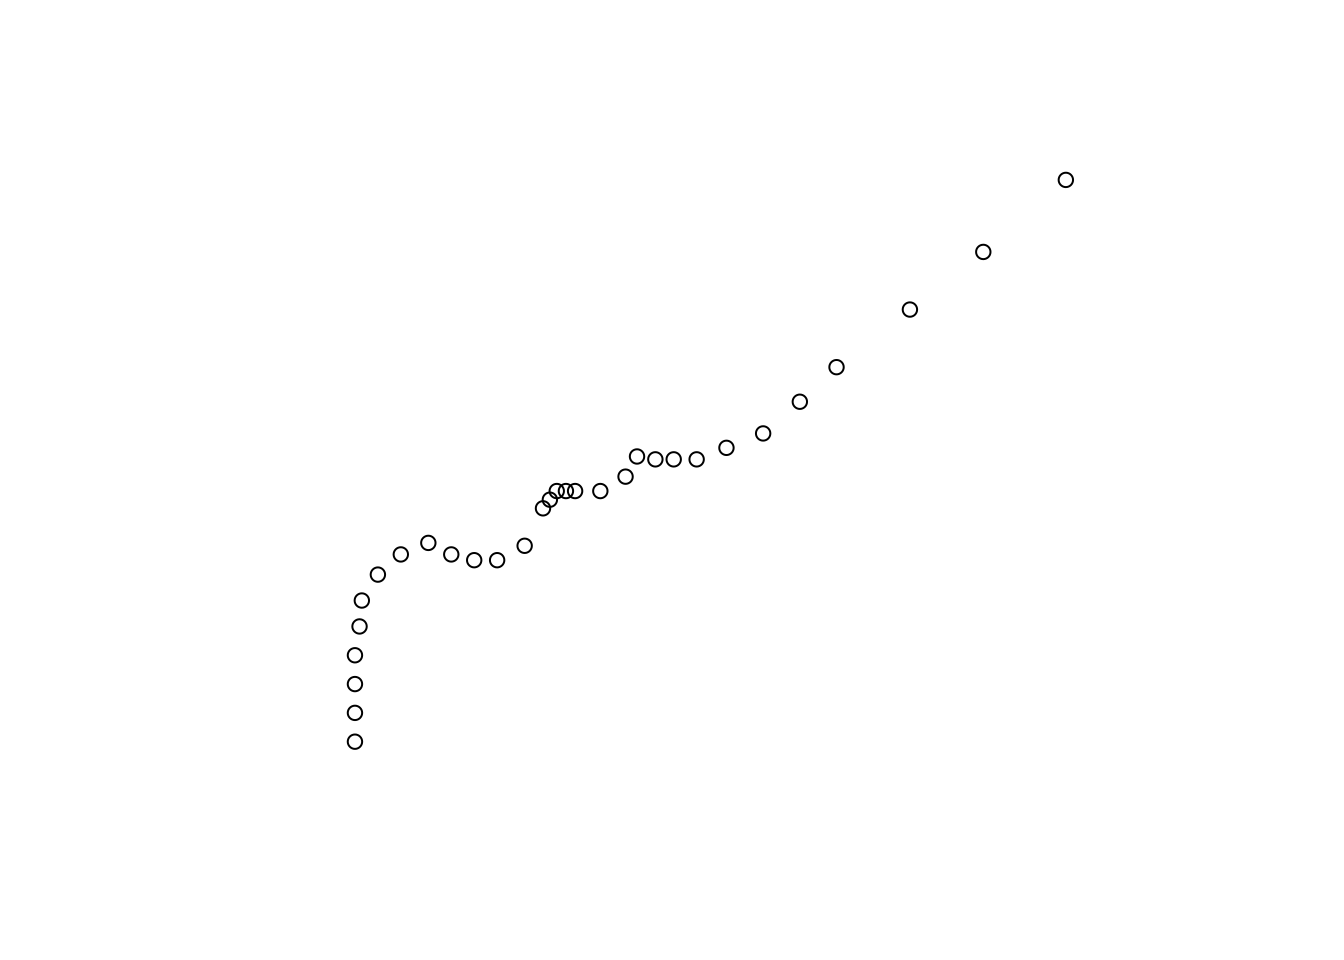 A point trajectory converted to `MULTIPOINT`